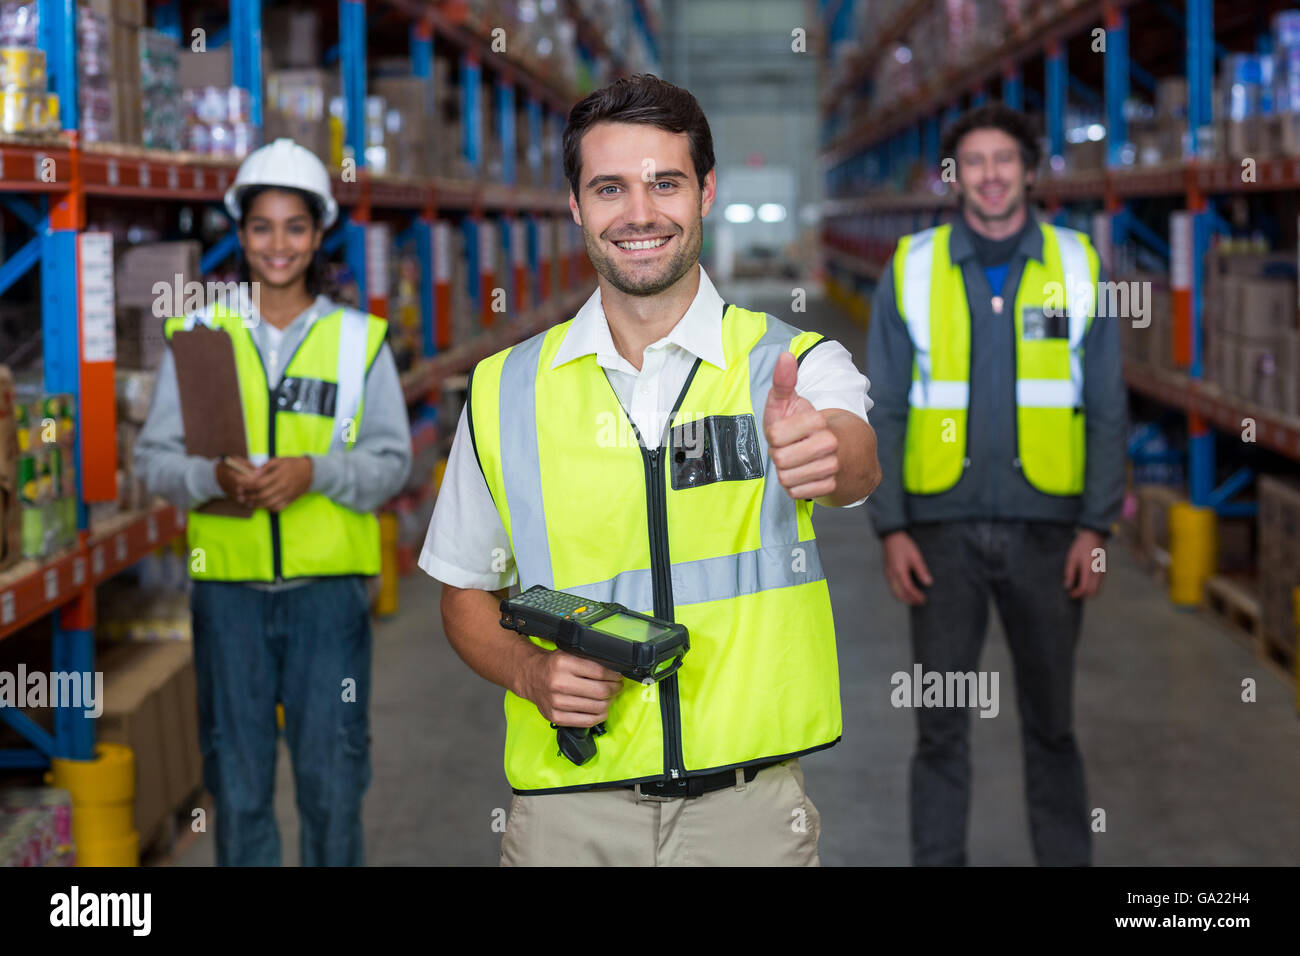 Worker with thumb up wearing yellow safety vest Stock Photo